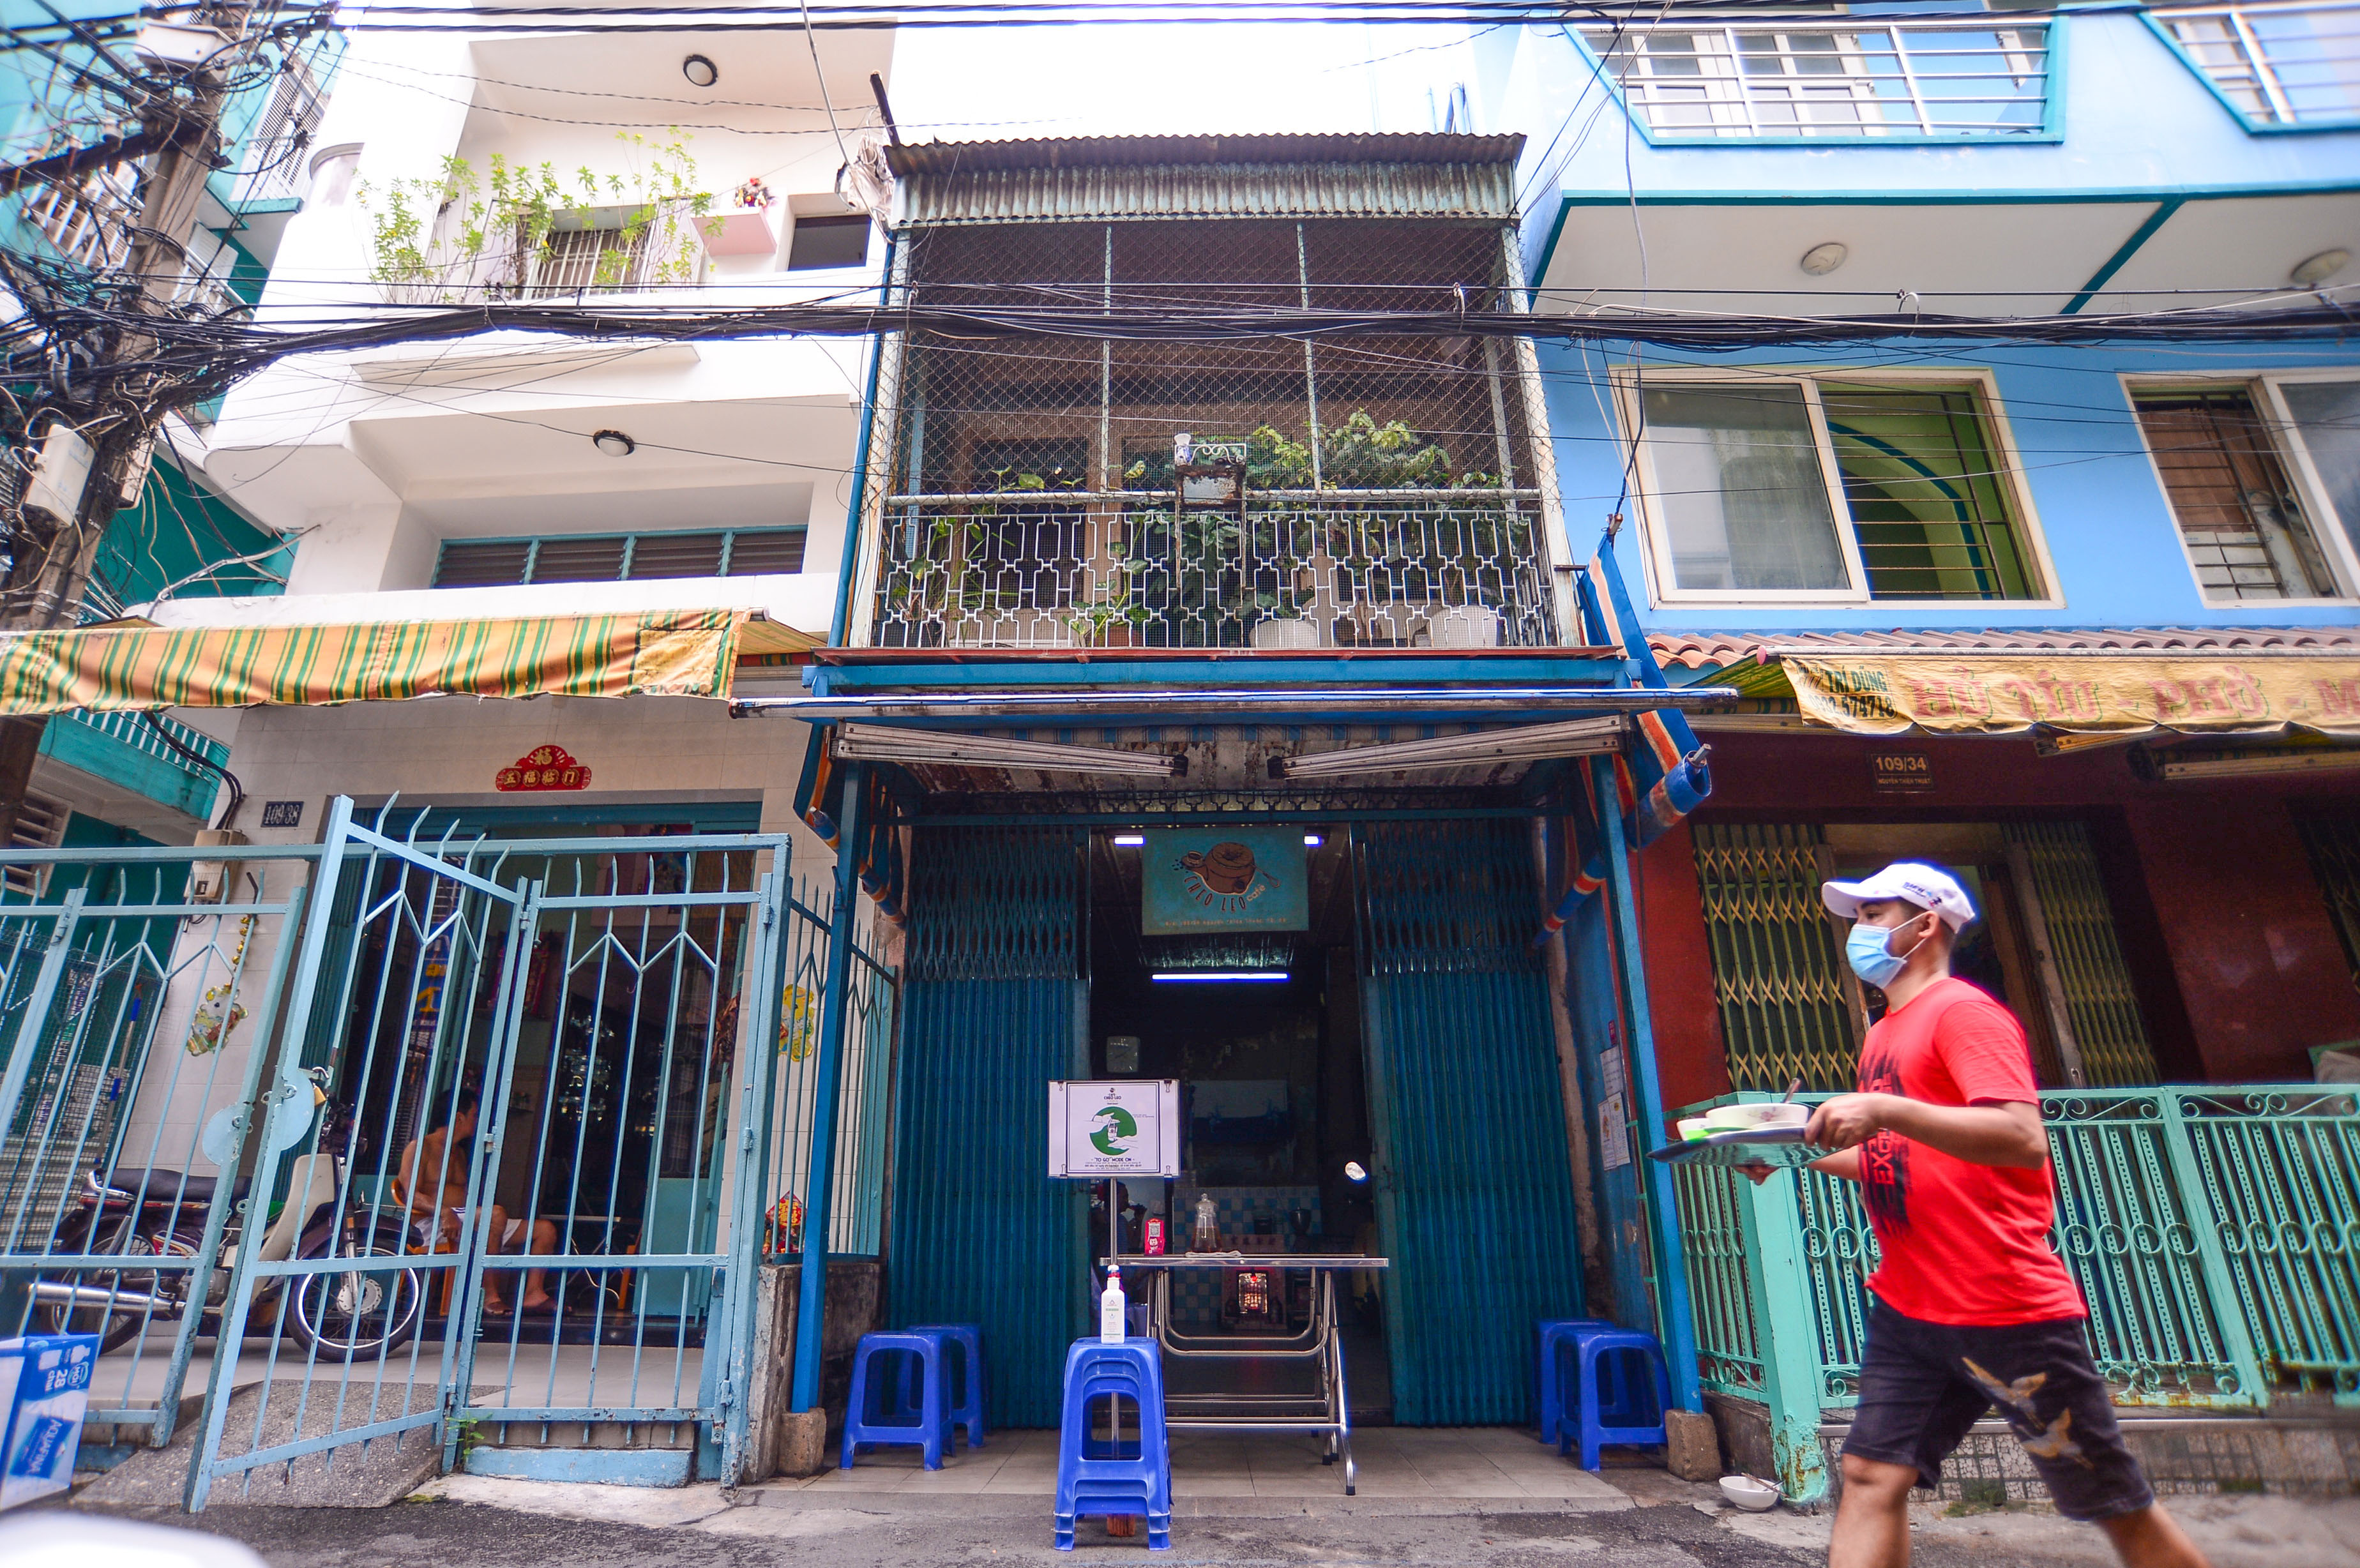 Cheo Leo Cafe is located down a small alley on Nguyen Thien Thuat Street in District 3, Ho Chi Minh City. Photo: Quang Dinh / Tuoi Tre